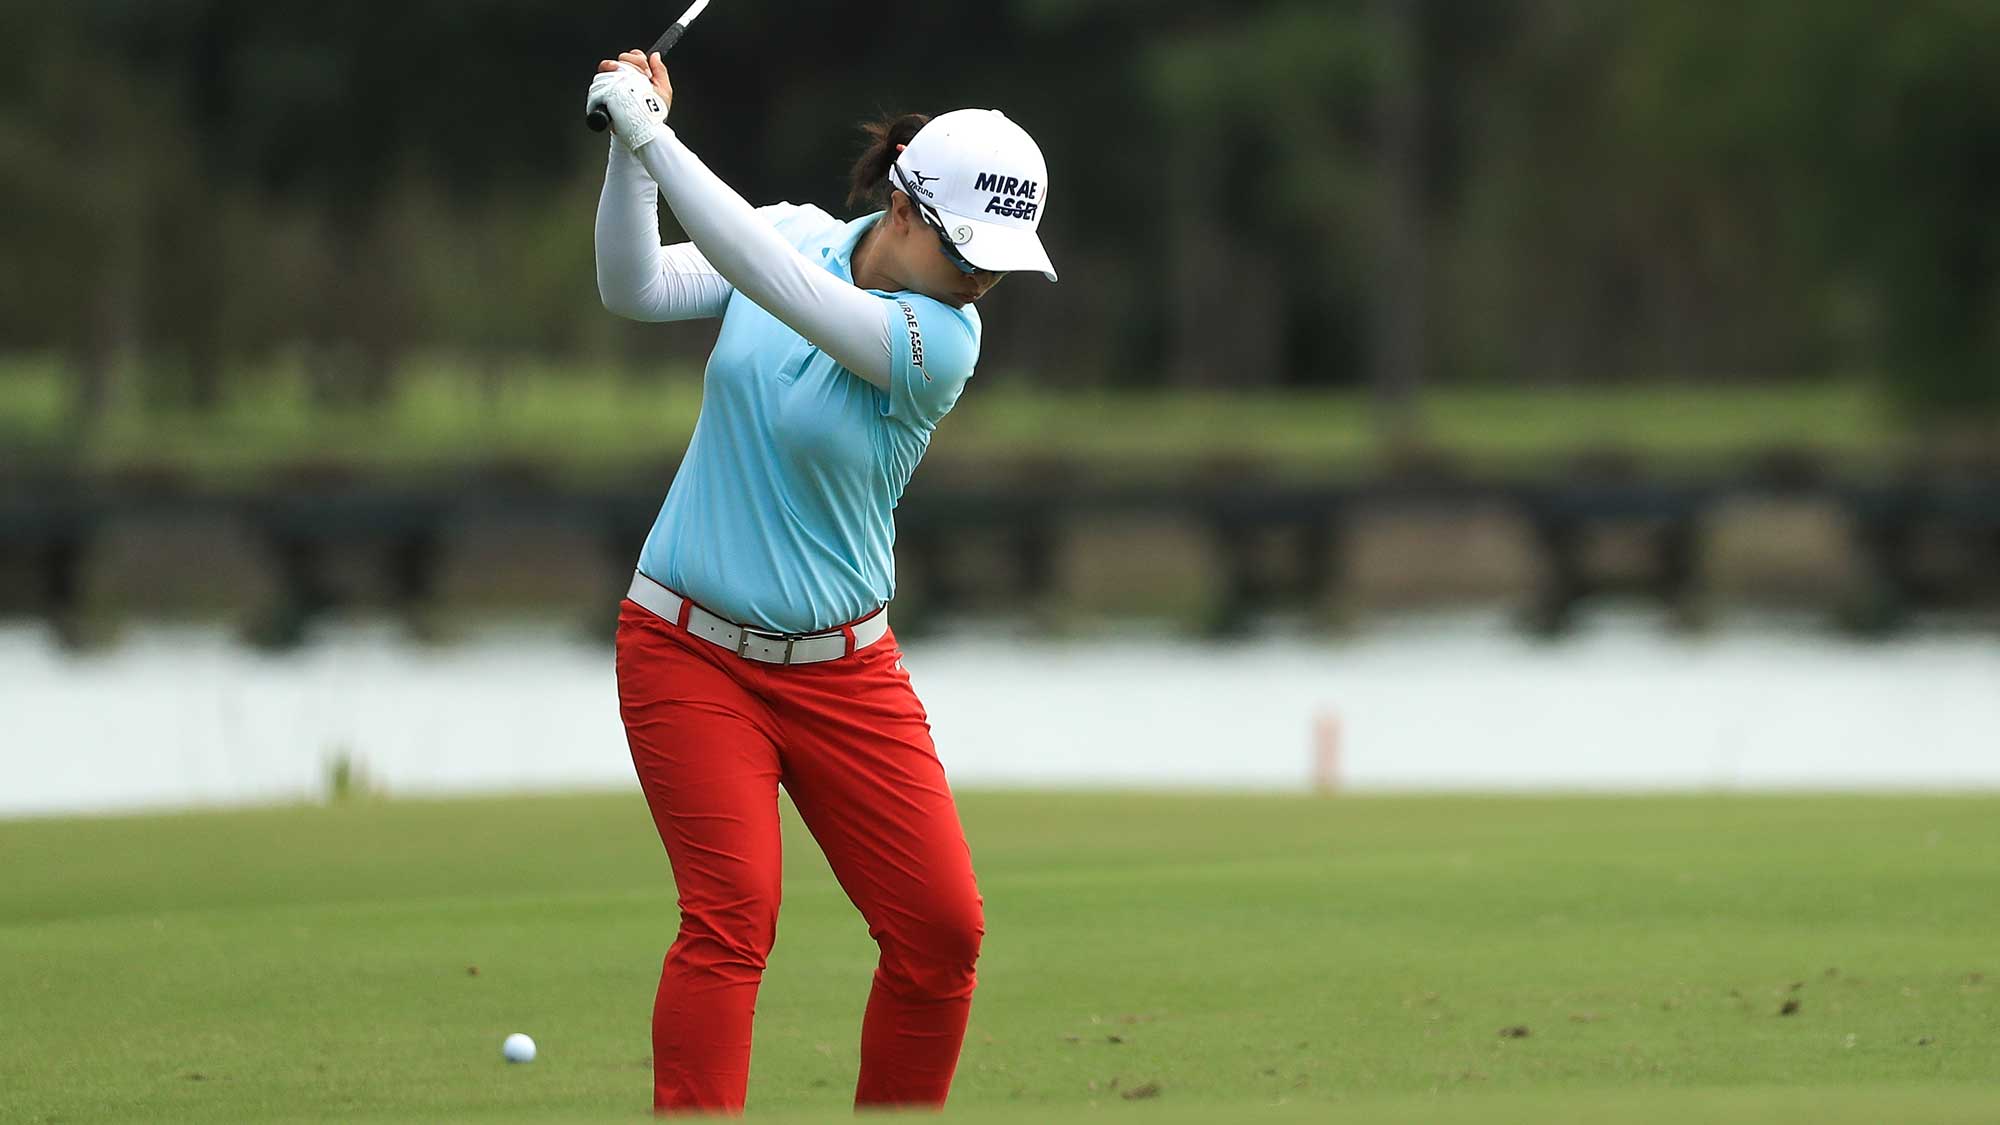 Sei Young Kim of Korea plays her second shot on the first hole during the final round of the LPGA CME Group Tour Championship